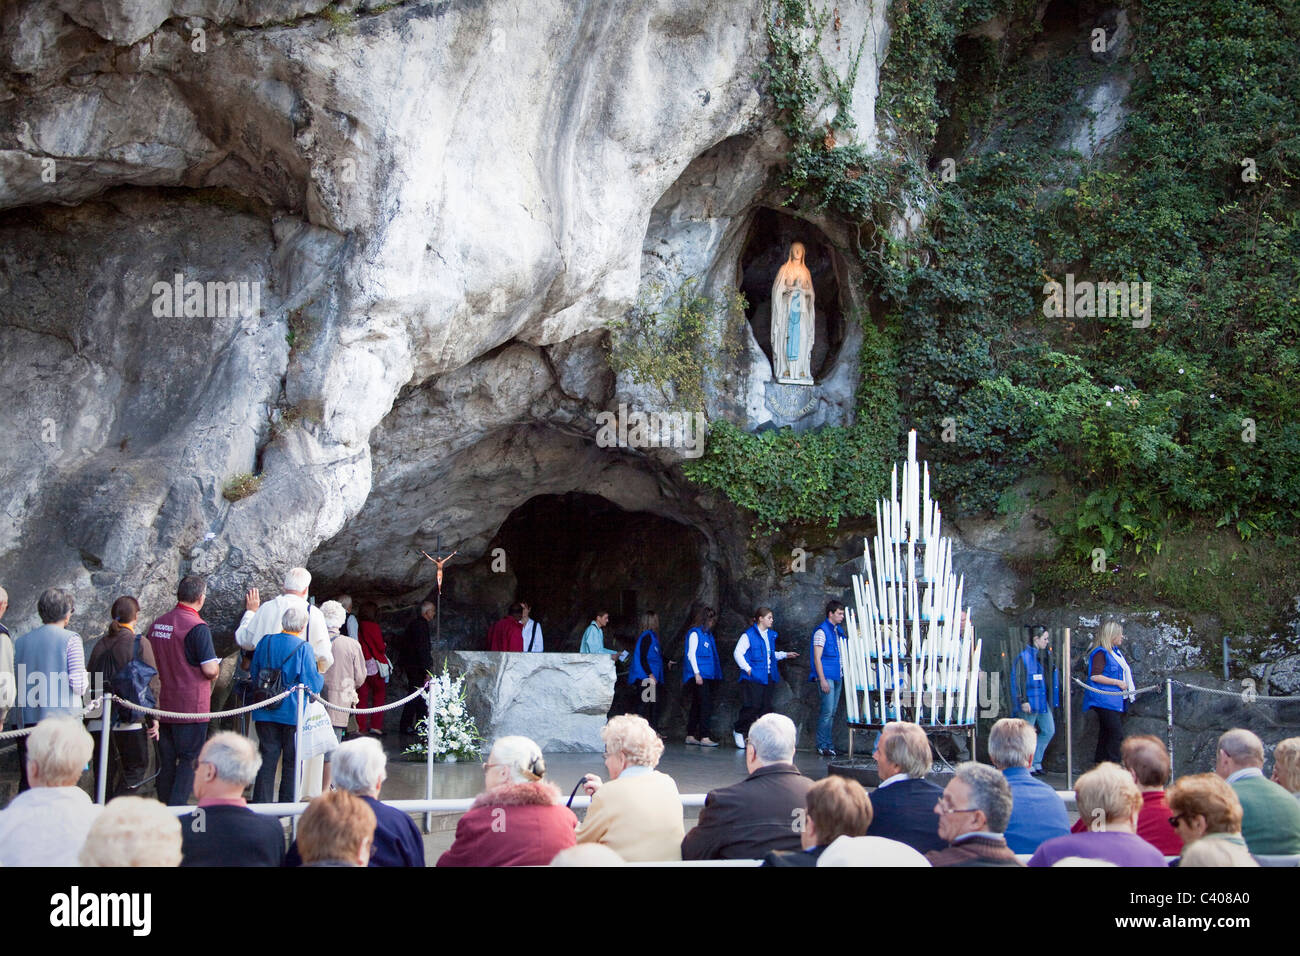 France, Europe, Lourdes, Pyrenees, place of pilgrimage, France, Europe, Lourdes, grotto, believers, creditors, religion Stock Photo